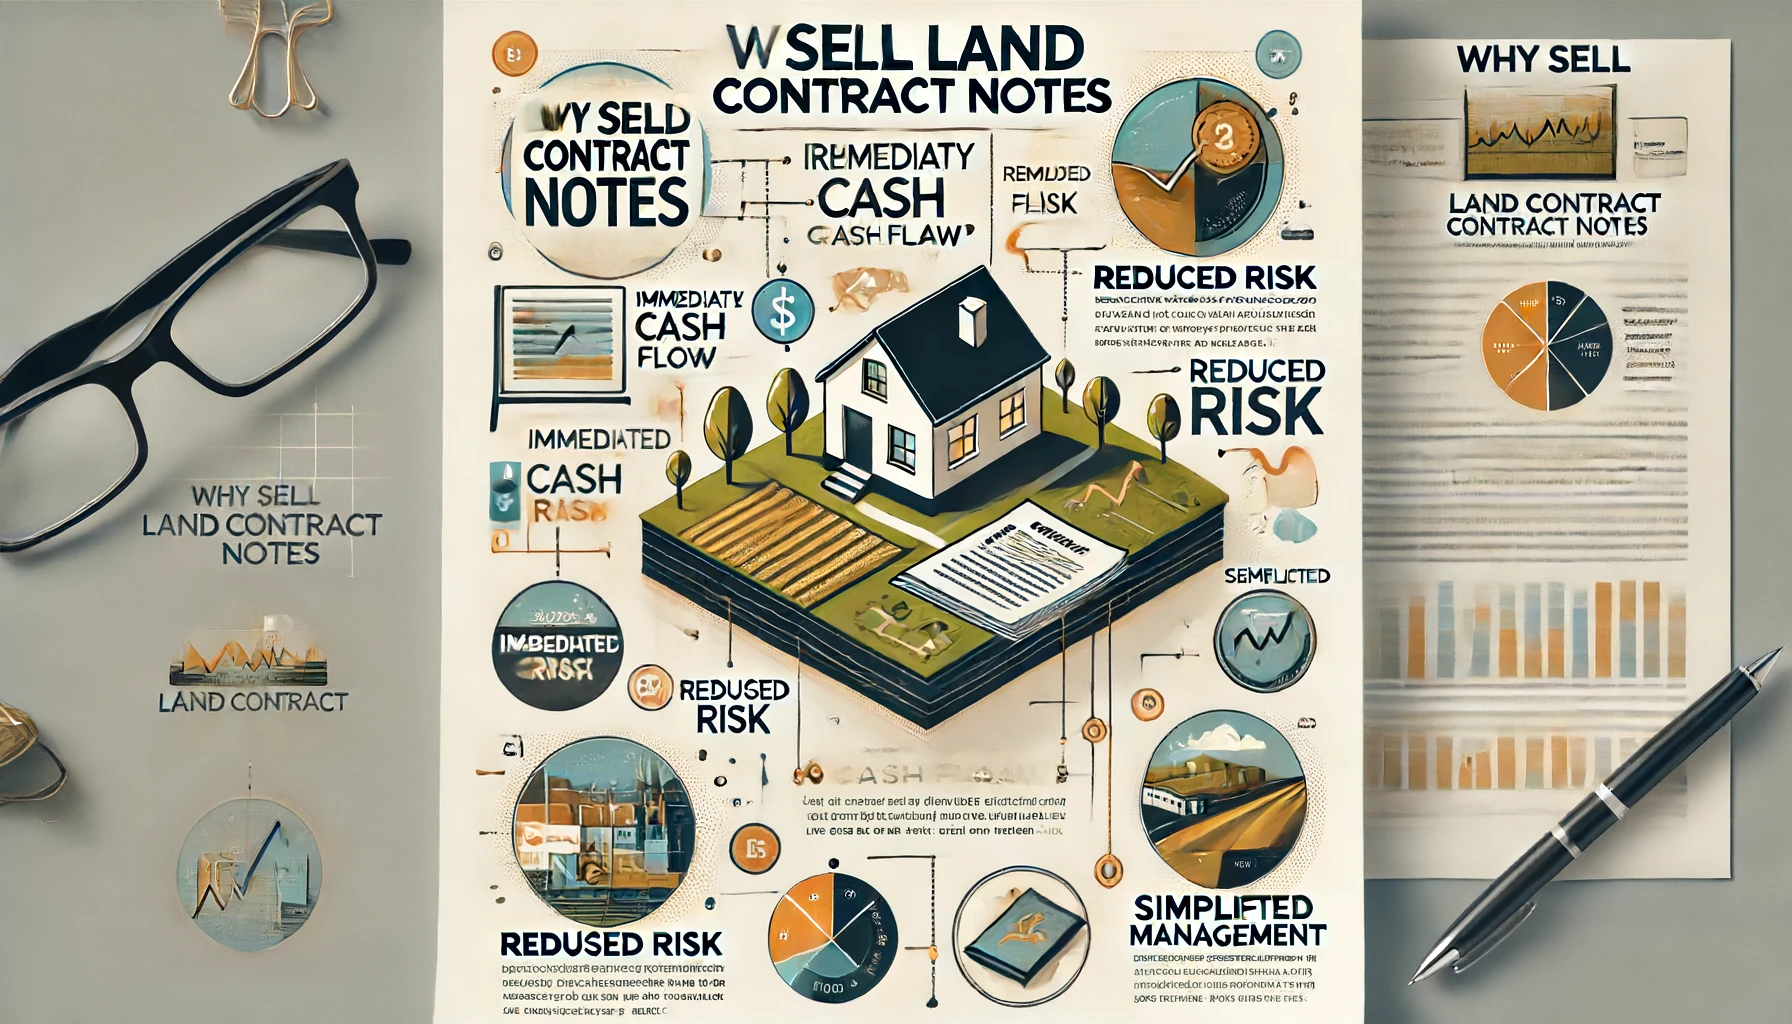 Why Sell Land Contract Notes